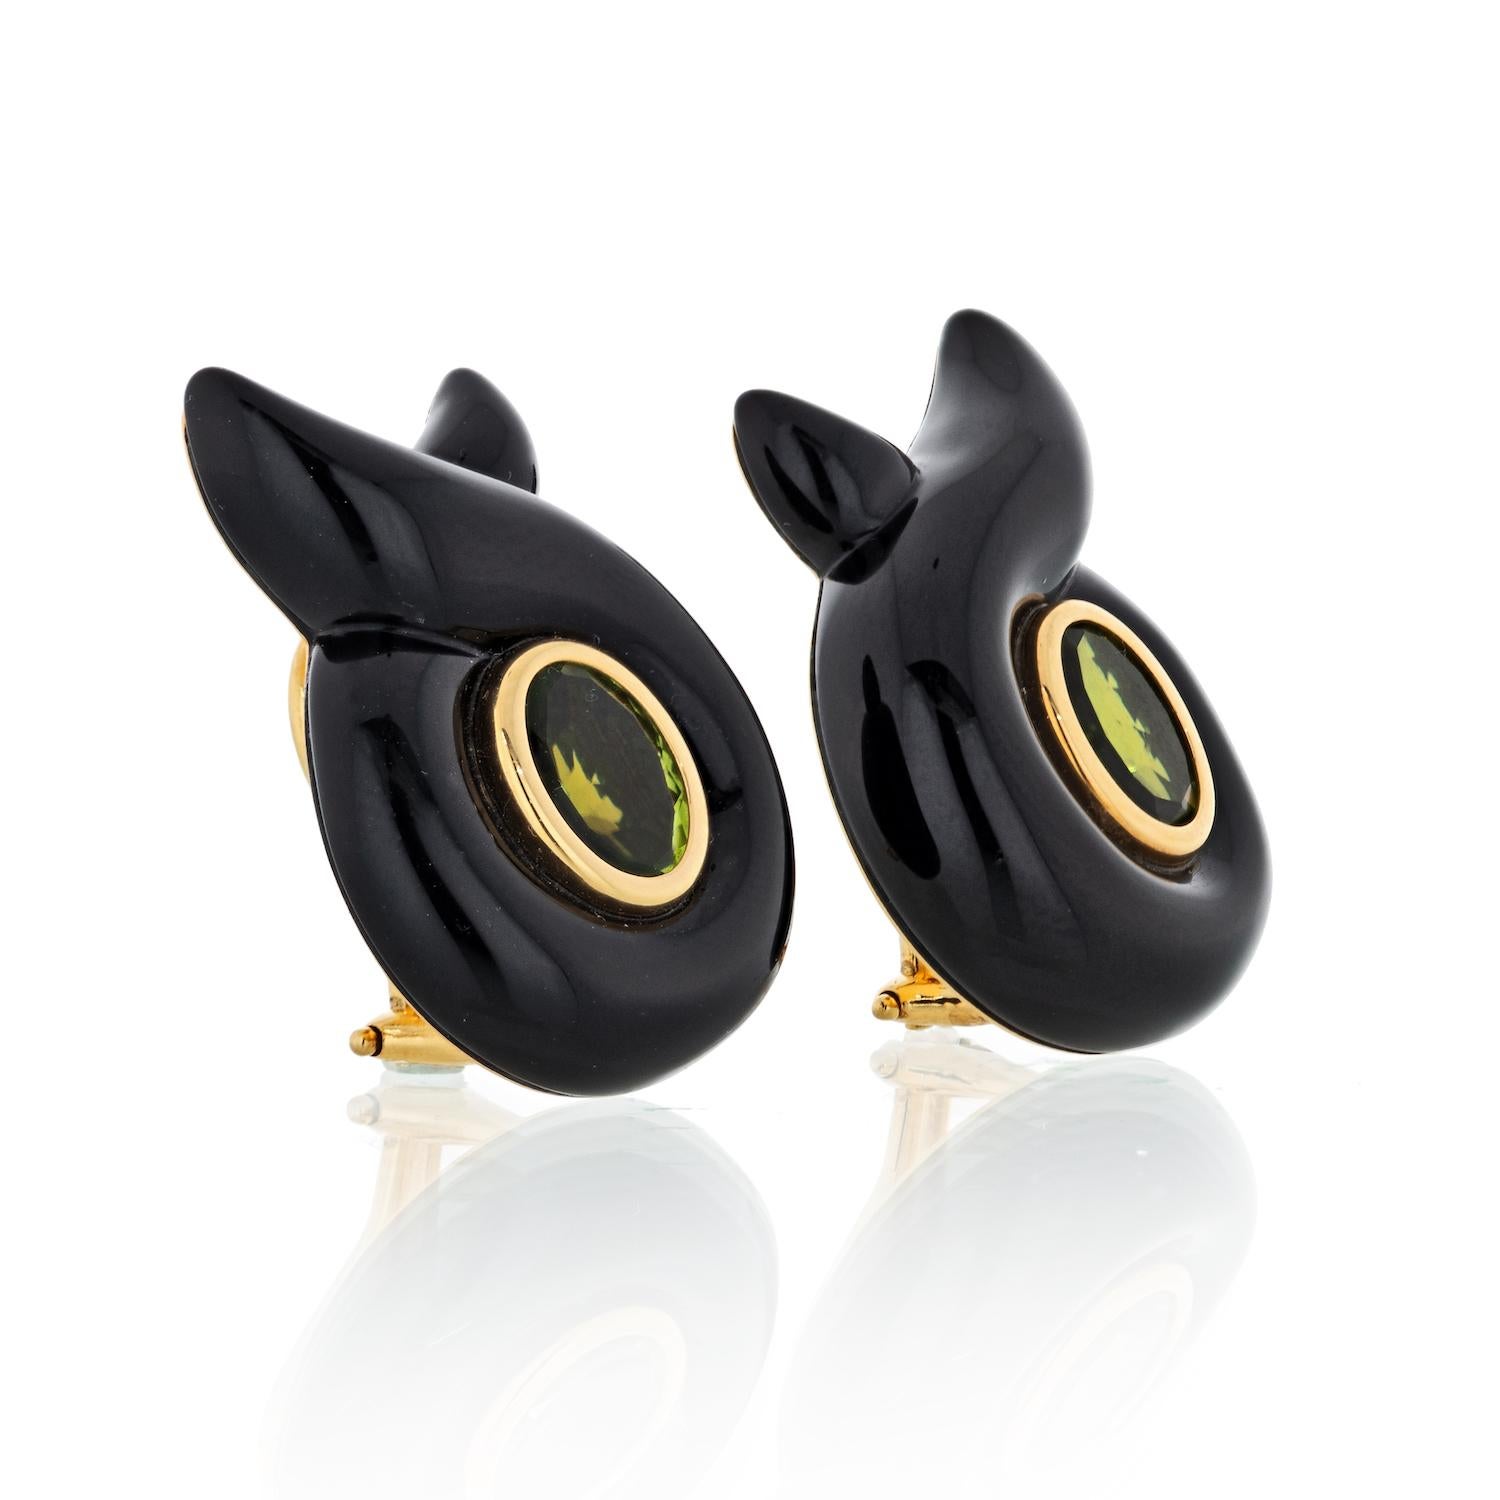 The earrings feature oval-shaped peridot measuring 8.45 x 6.42 mm - 8.45 x 6.85 mm, encircled by carved black onyx, set in 18k gold, marked Verdura. Gross weight 16.70 grams.
Dimensions: 1-1/8 inches x 13/16 inch.

The earrings are completed by